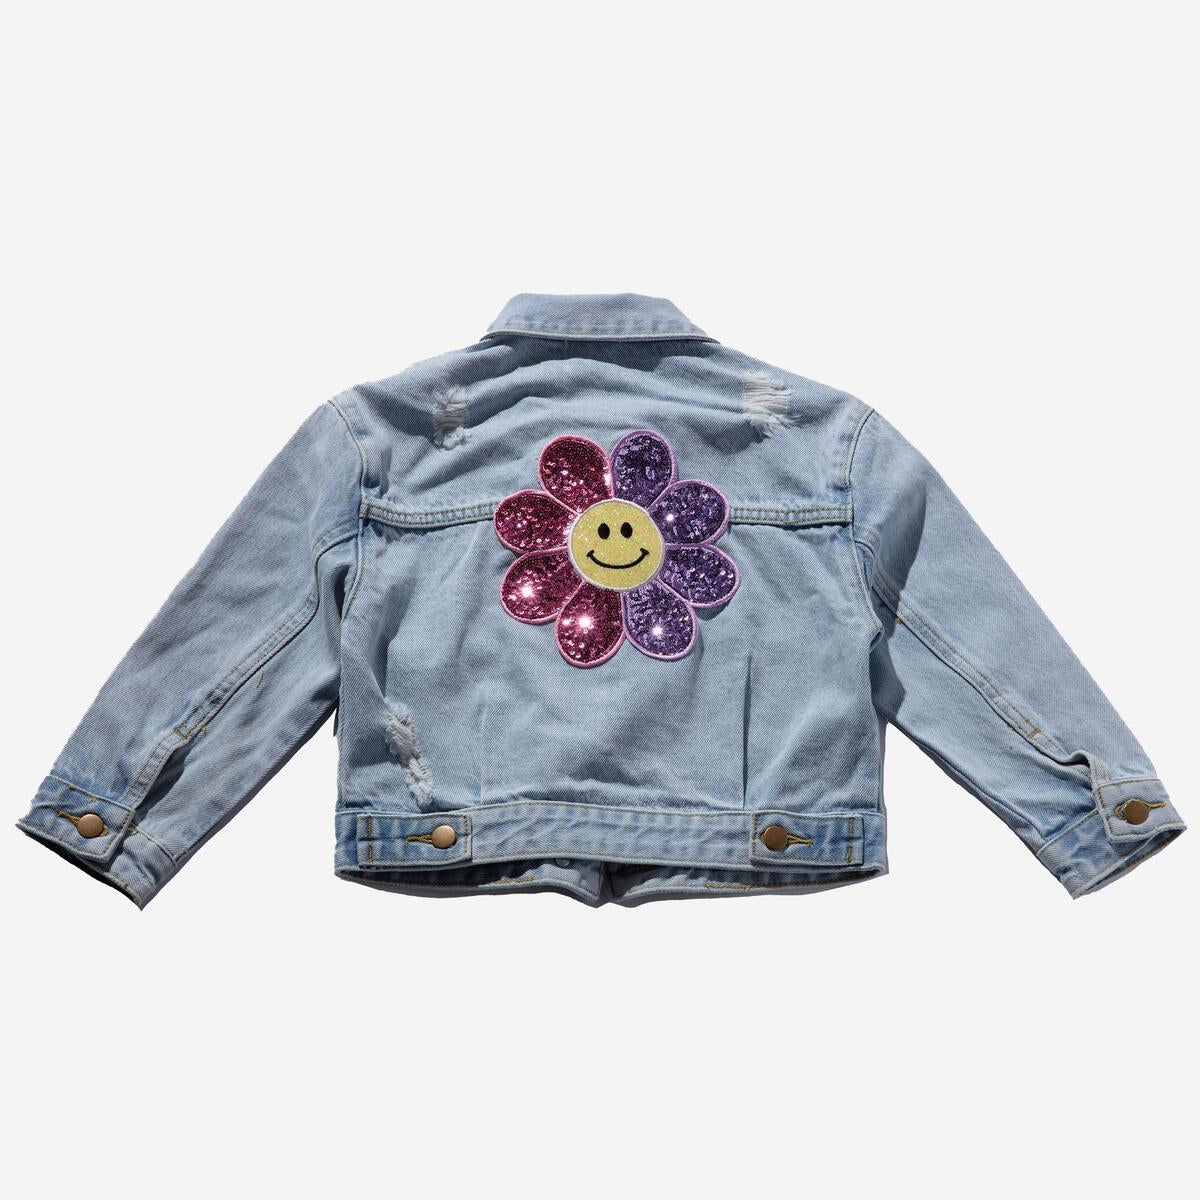 Patched Denim Jacket | Pink Daisy